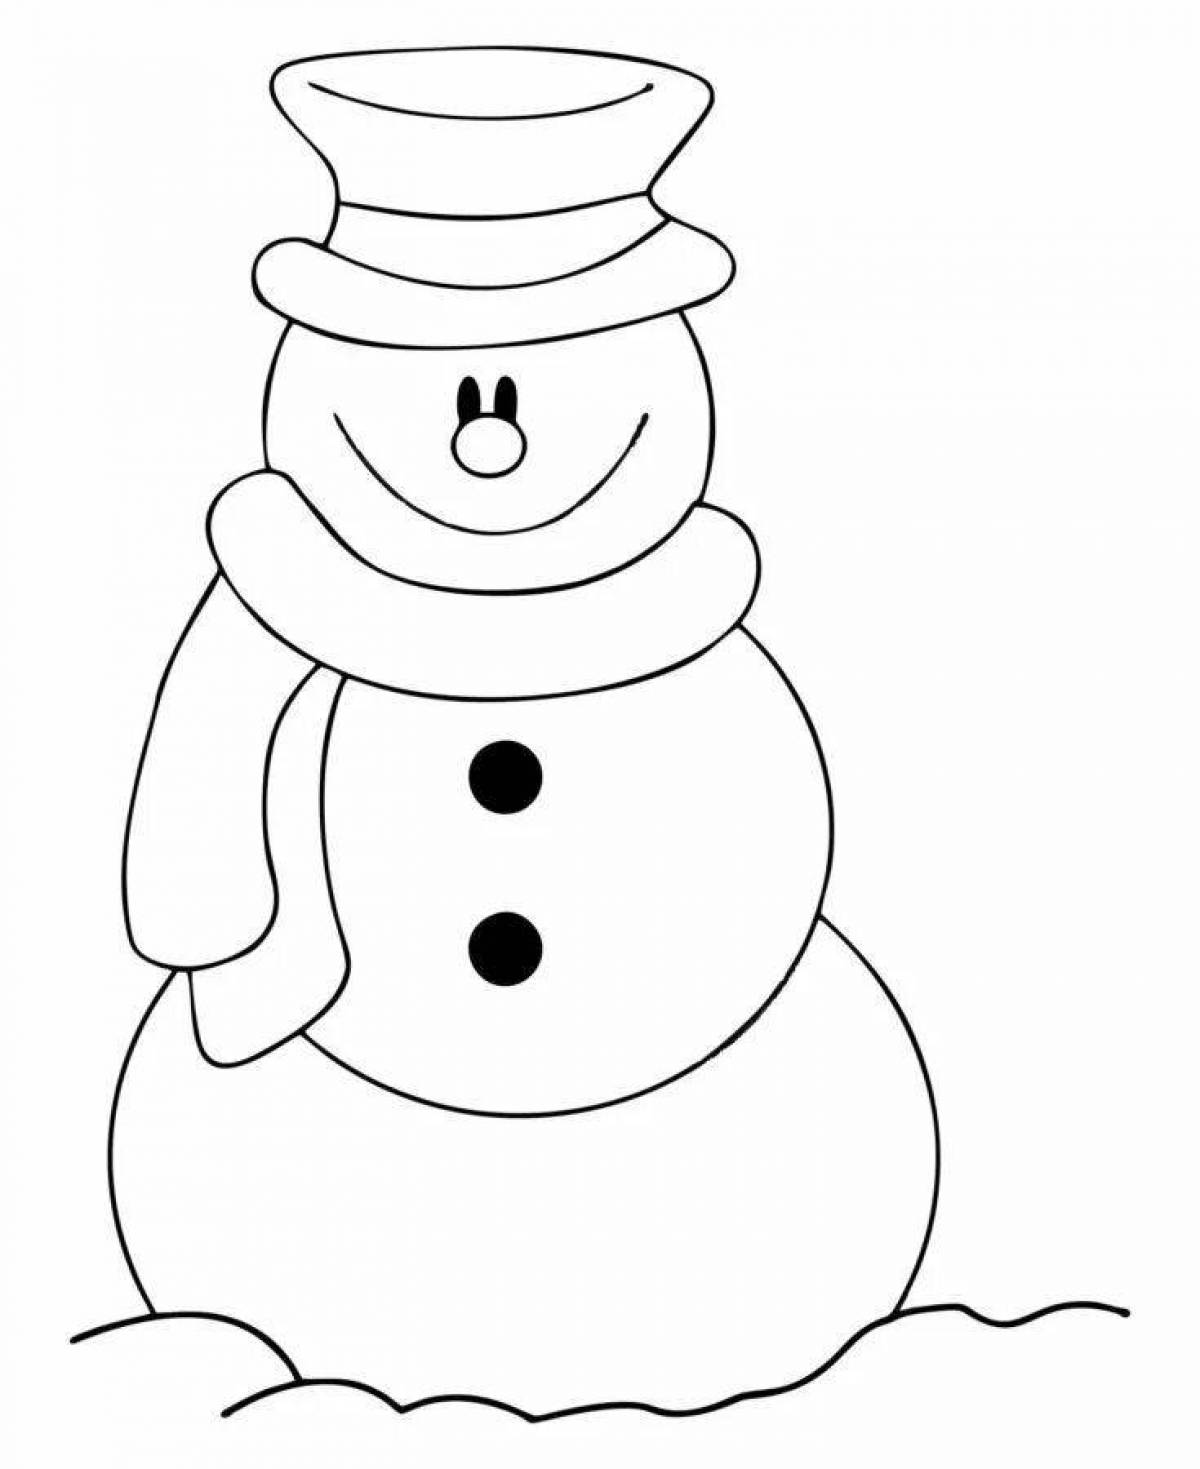 Holiday snowman coloring page